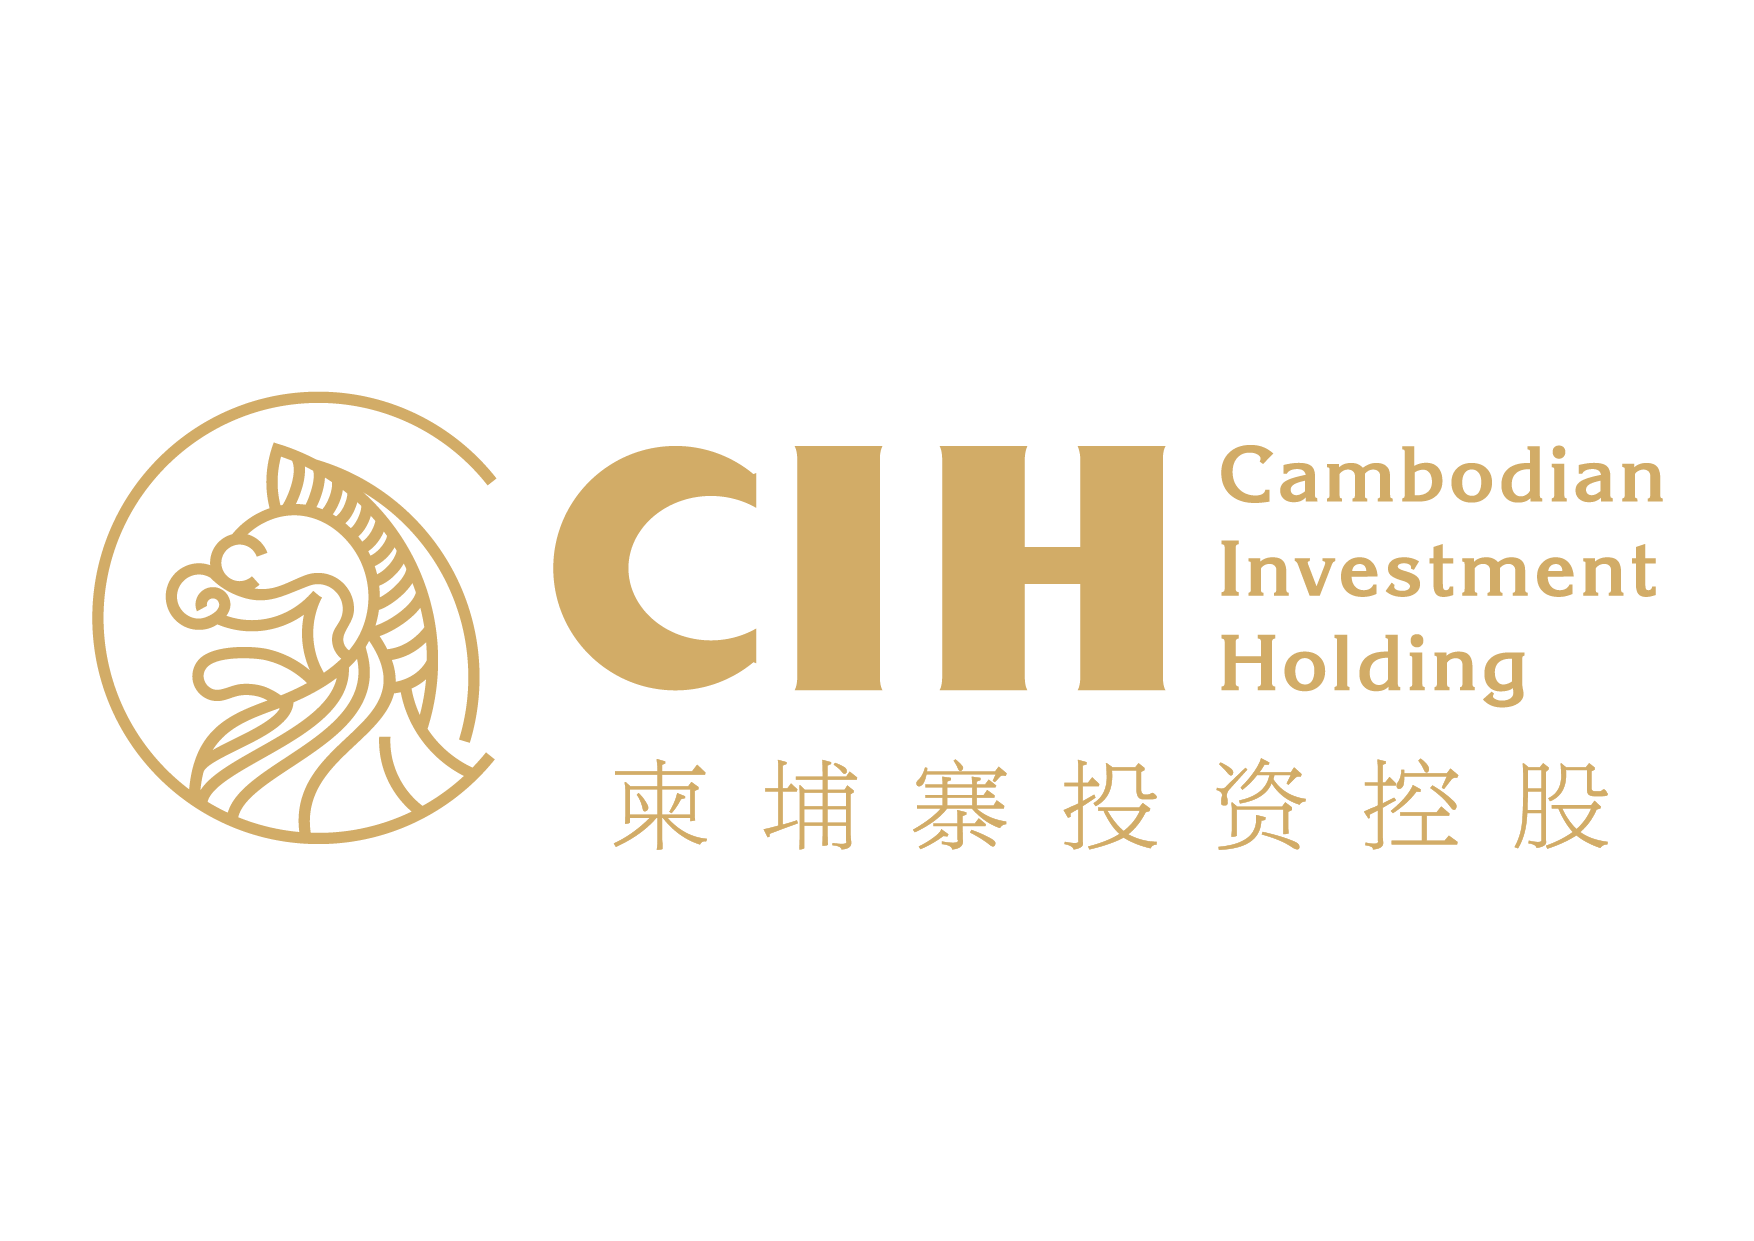 Cambodian Investment Holding Co., Ltd